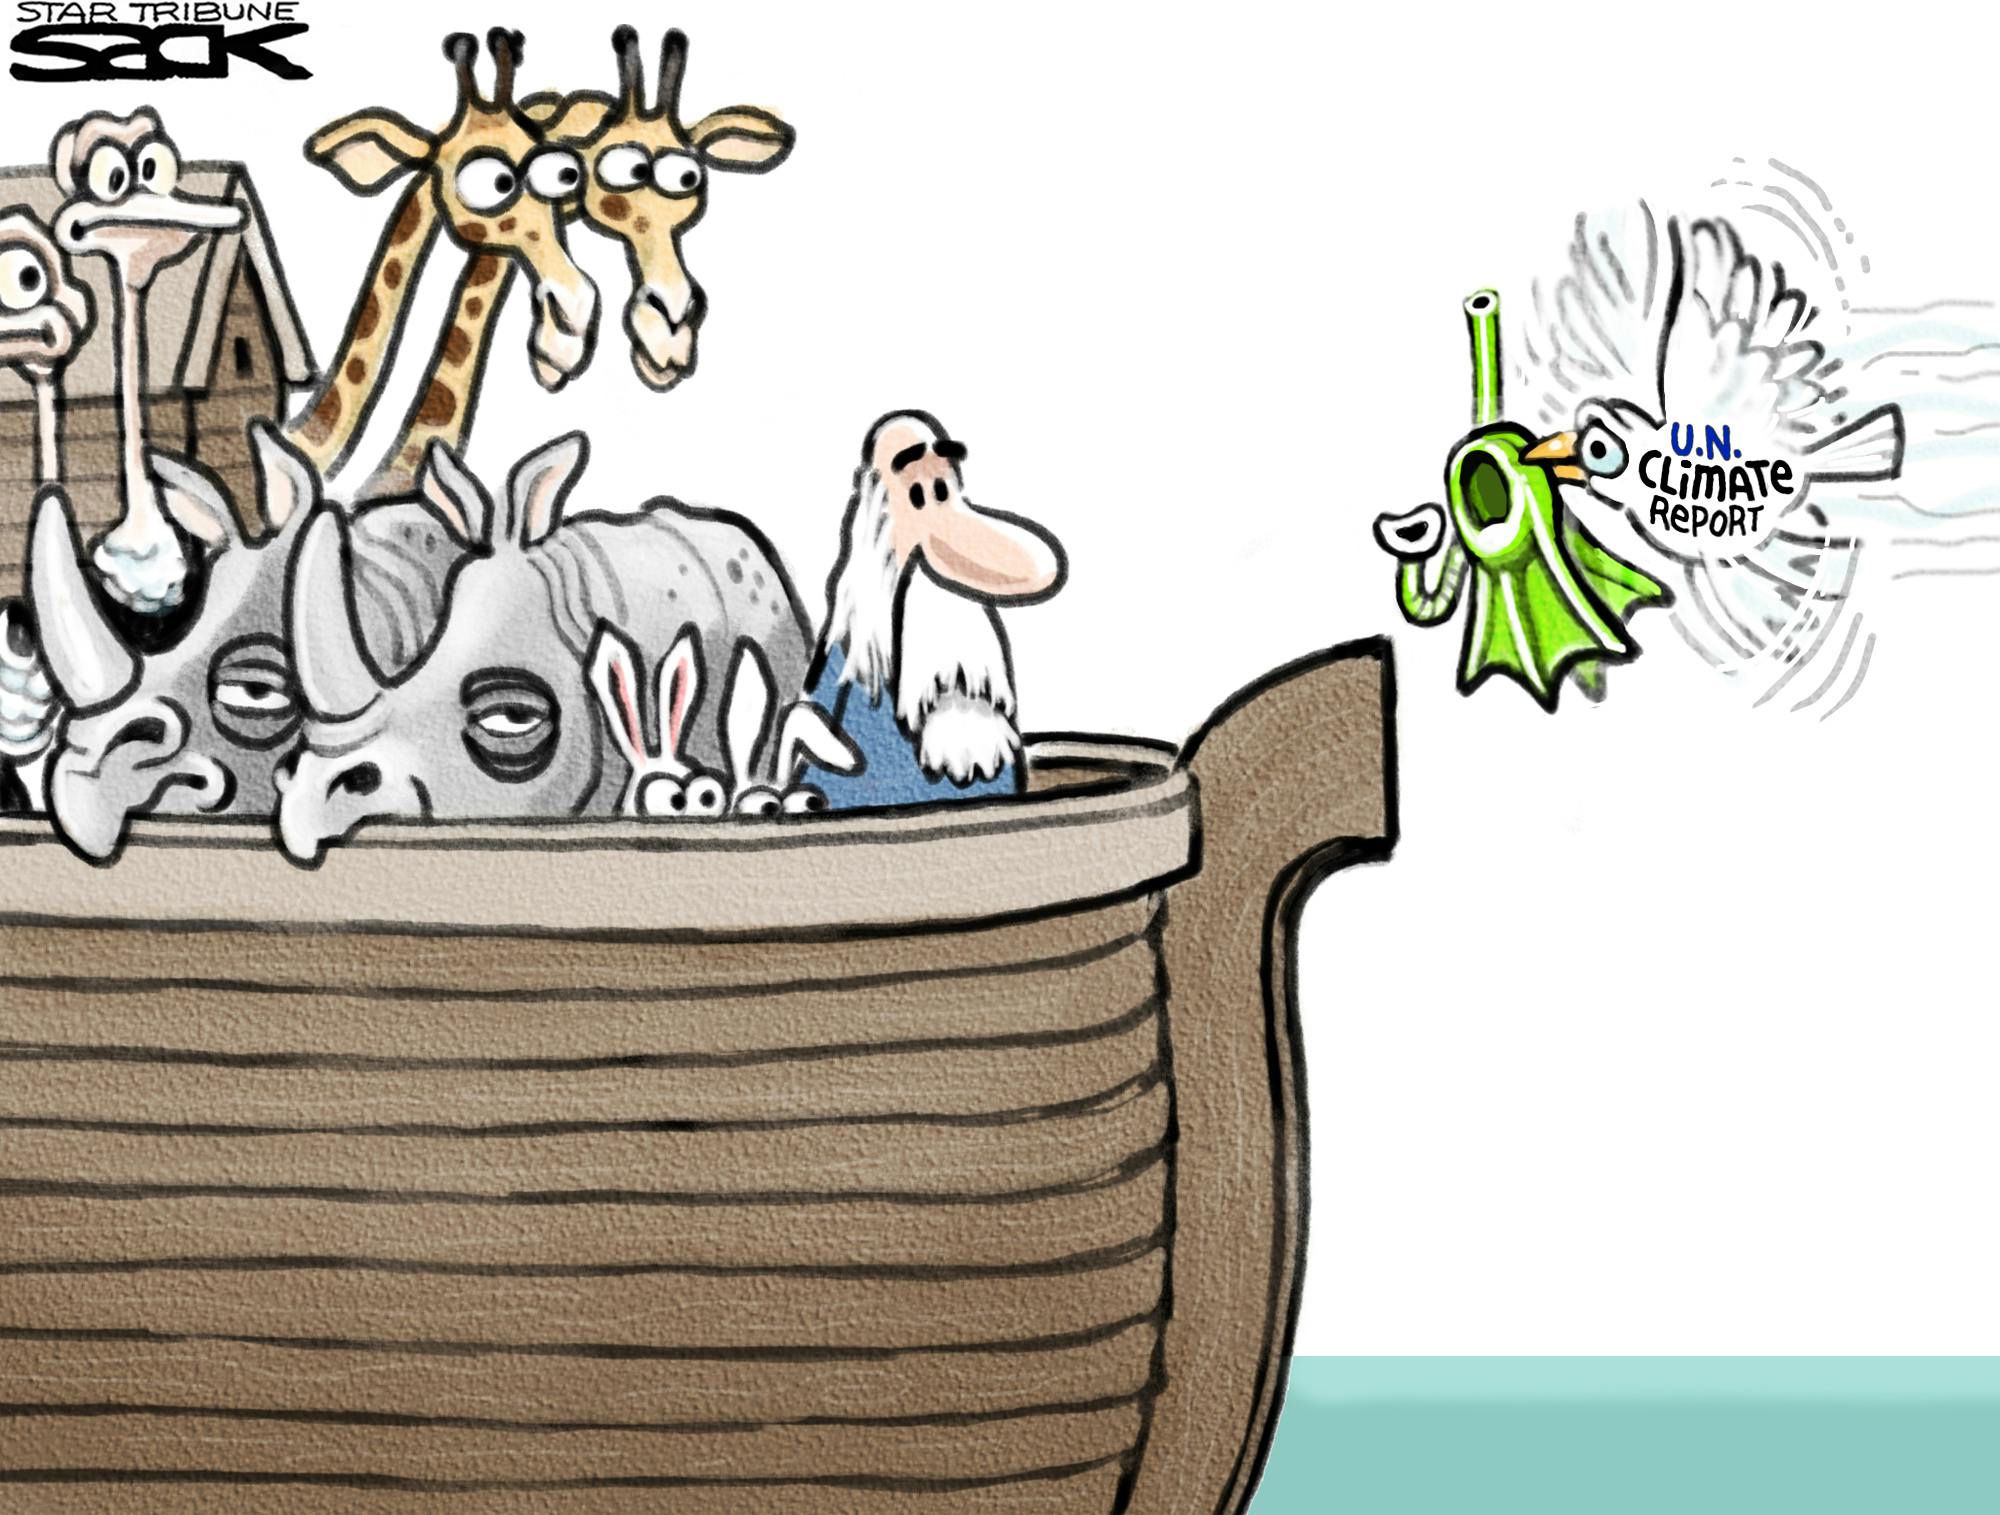 Sack cartoon: The great flood of climate alerts